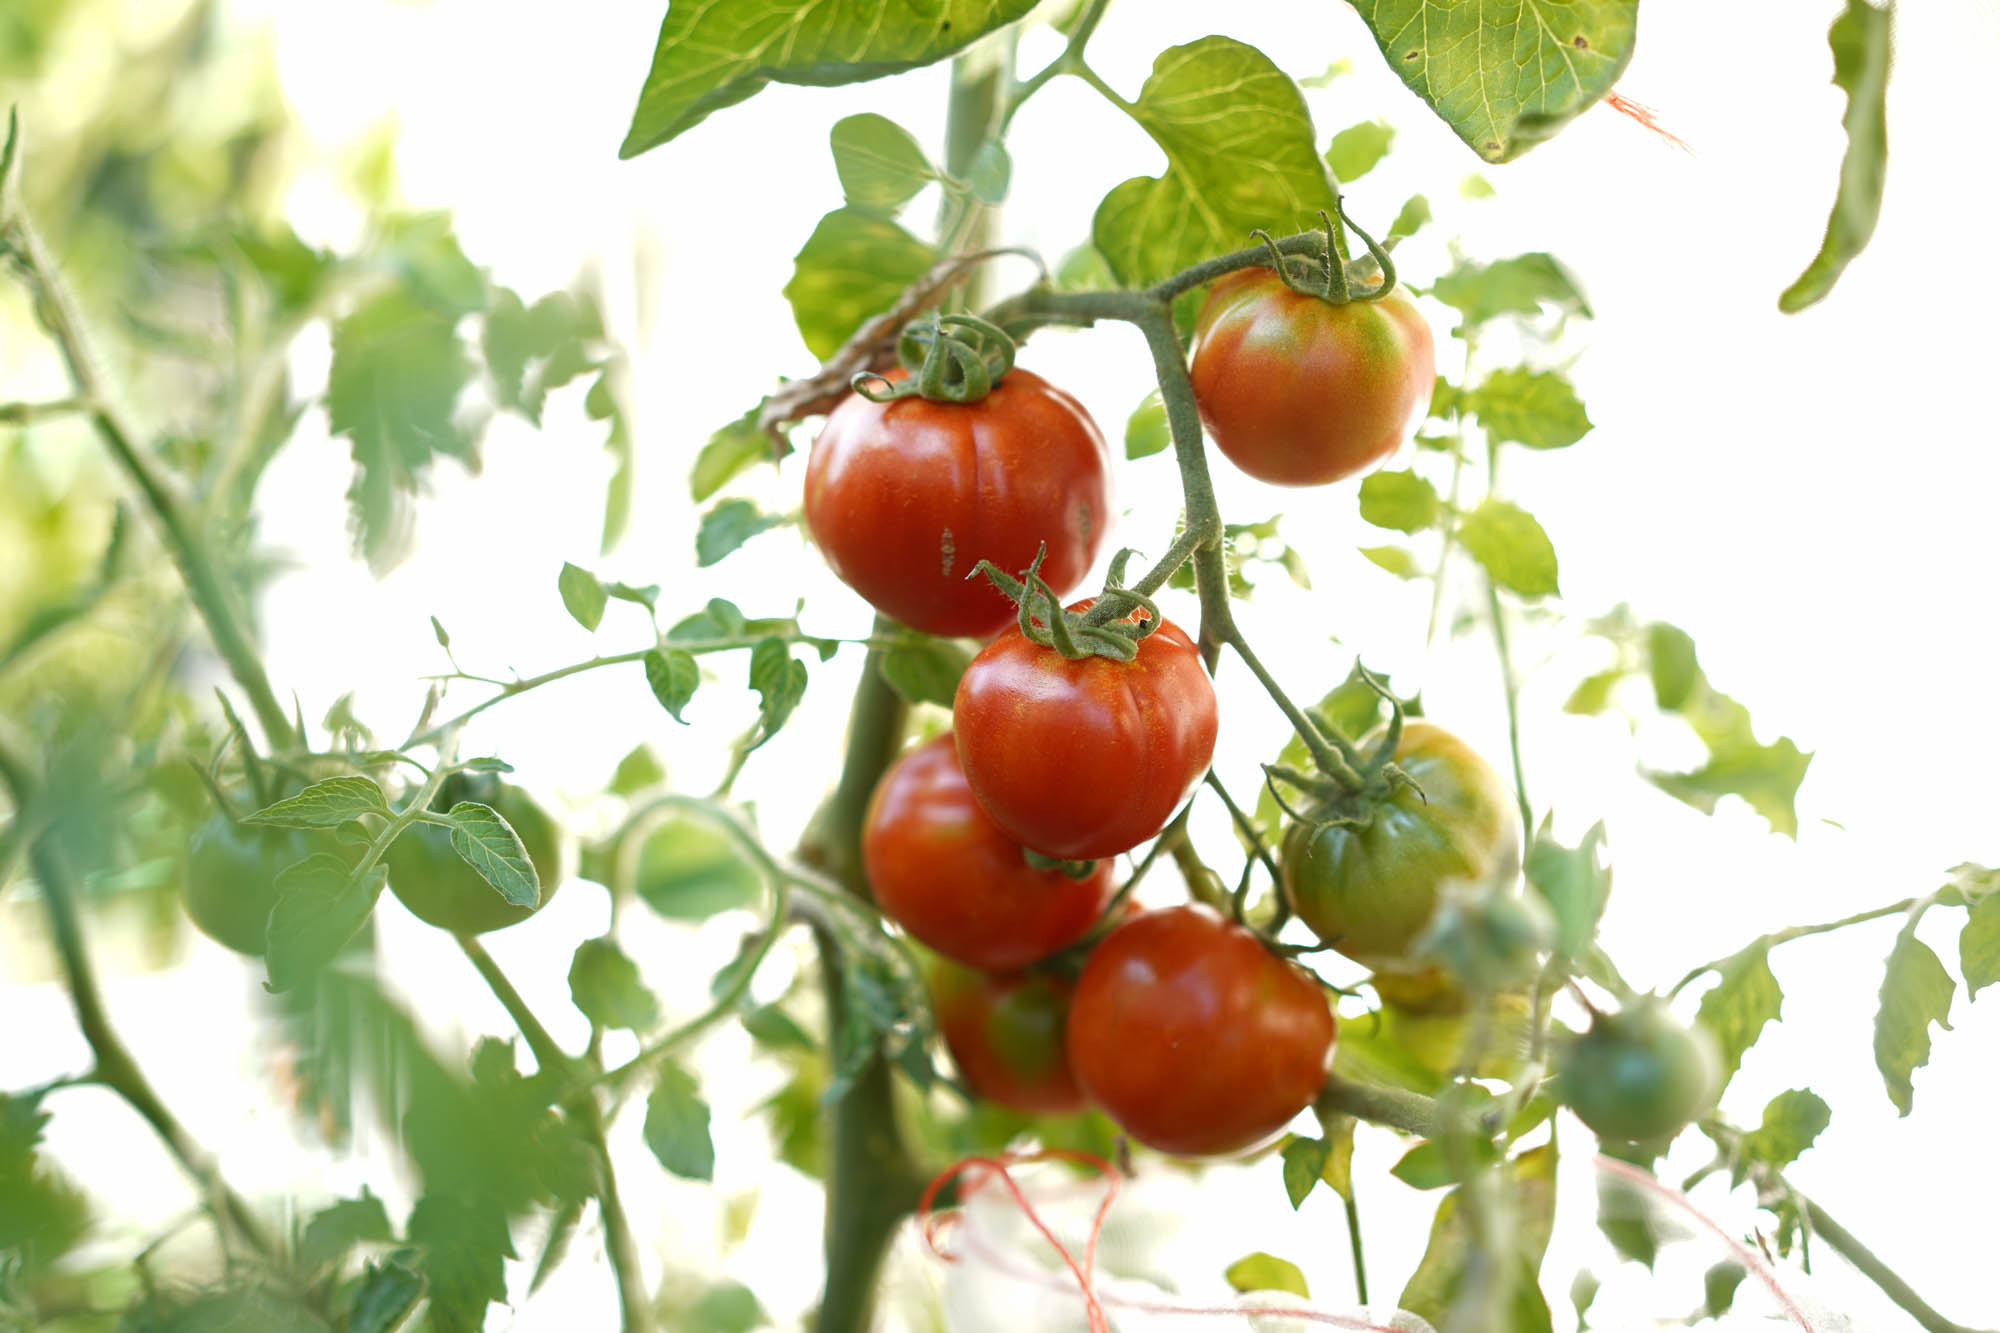 11 Tips for Growing Terrific Tomatoes in Pots